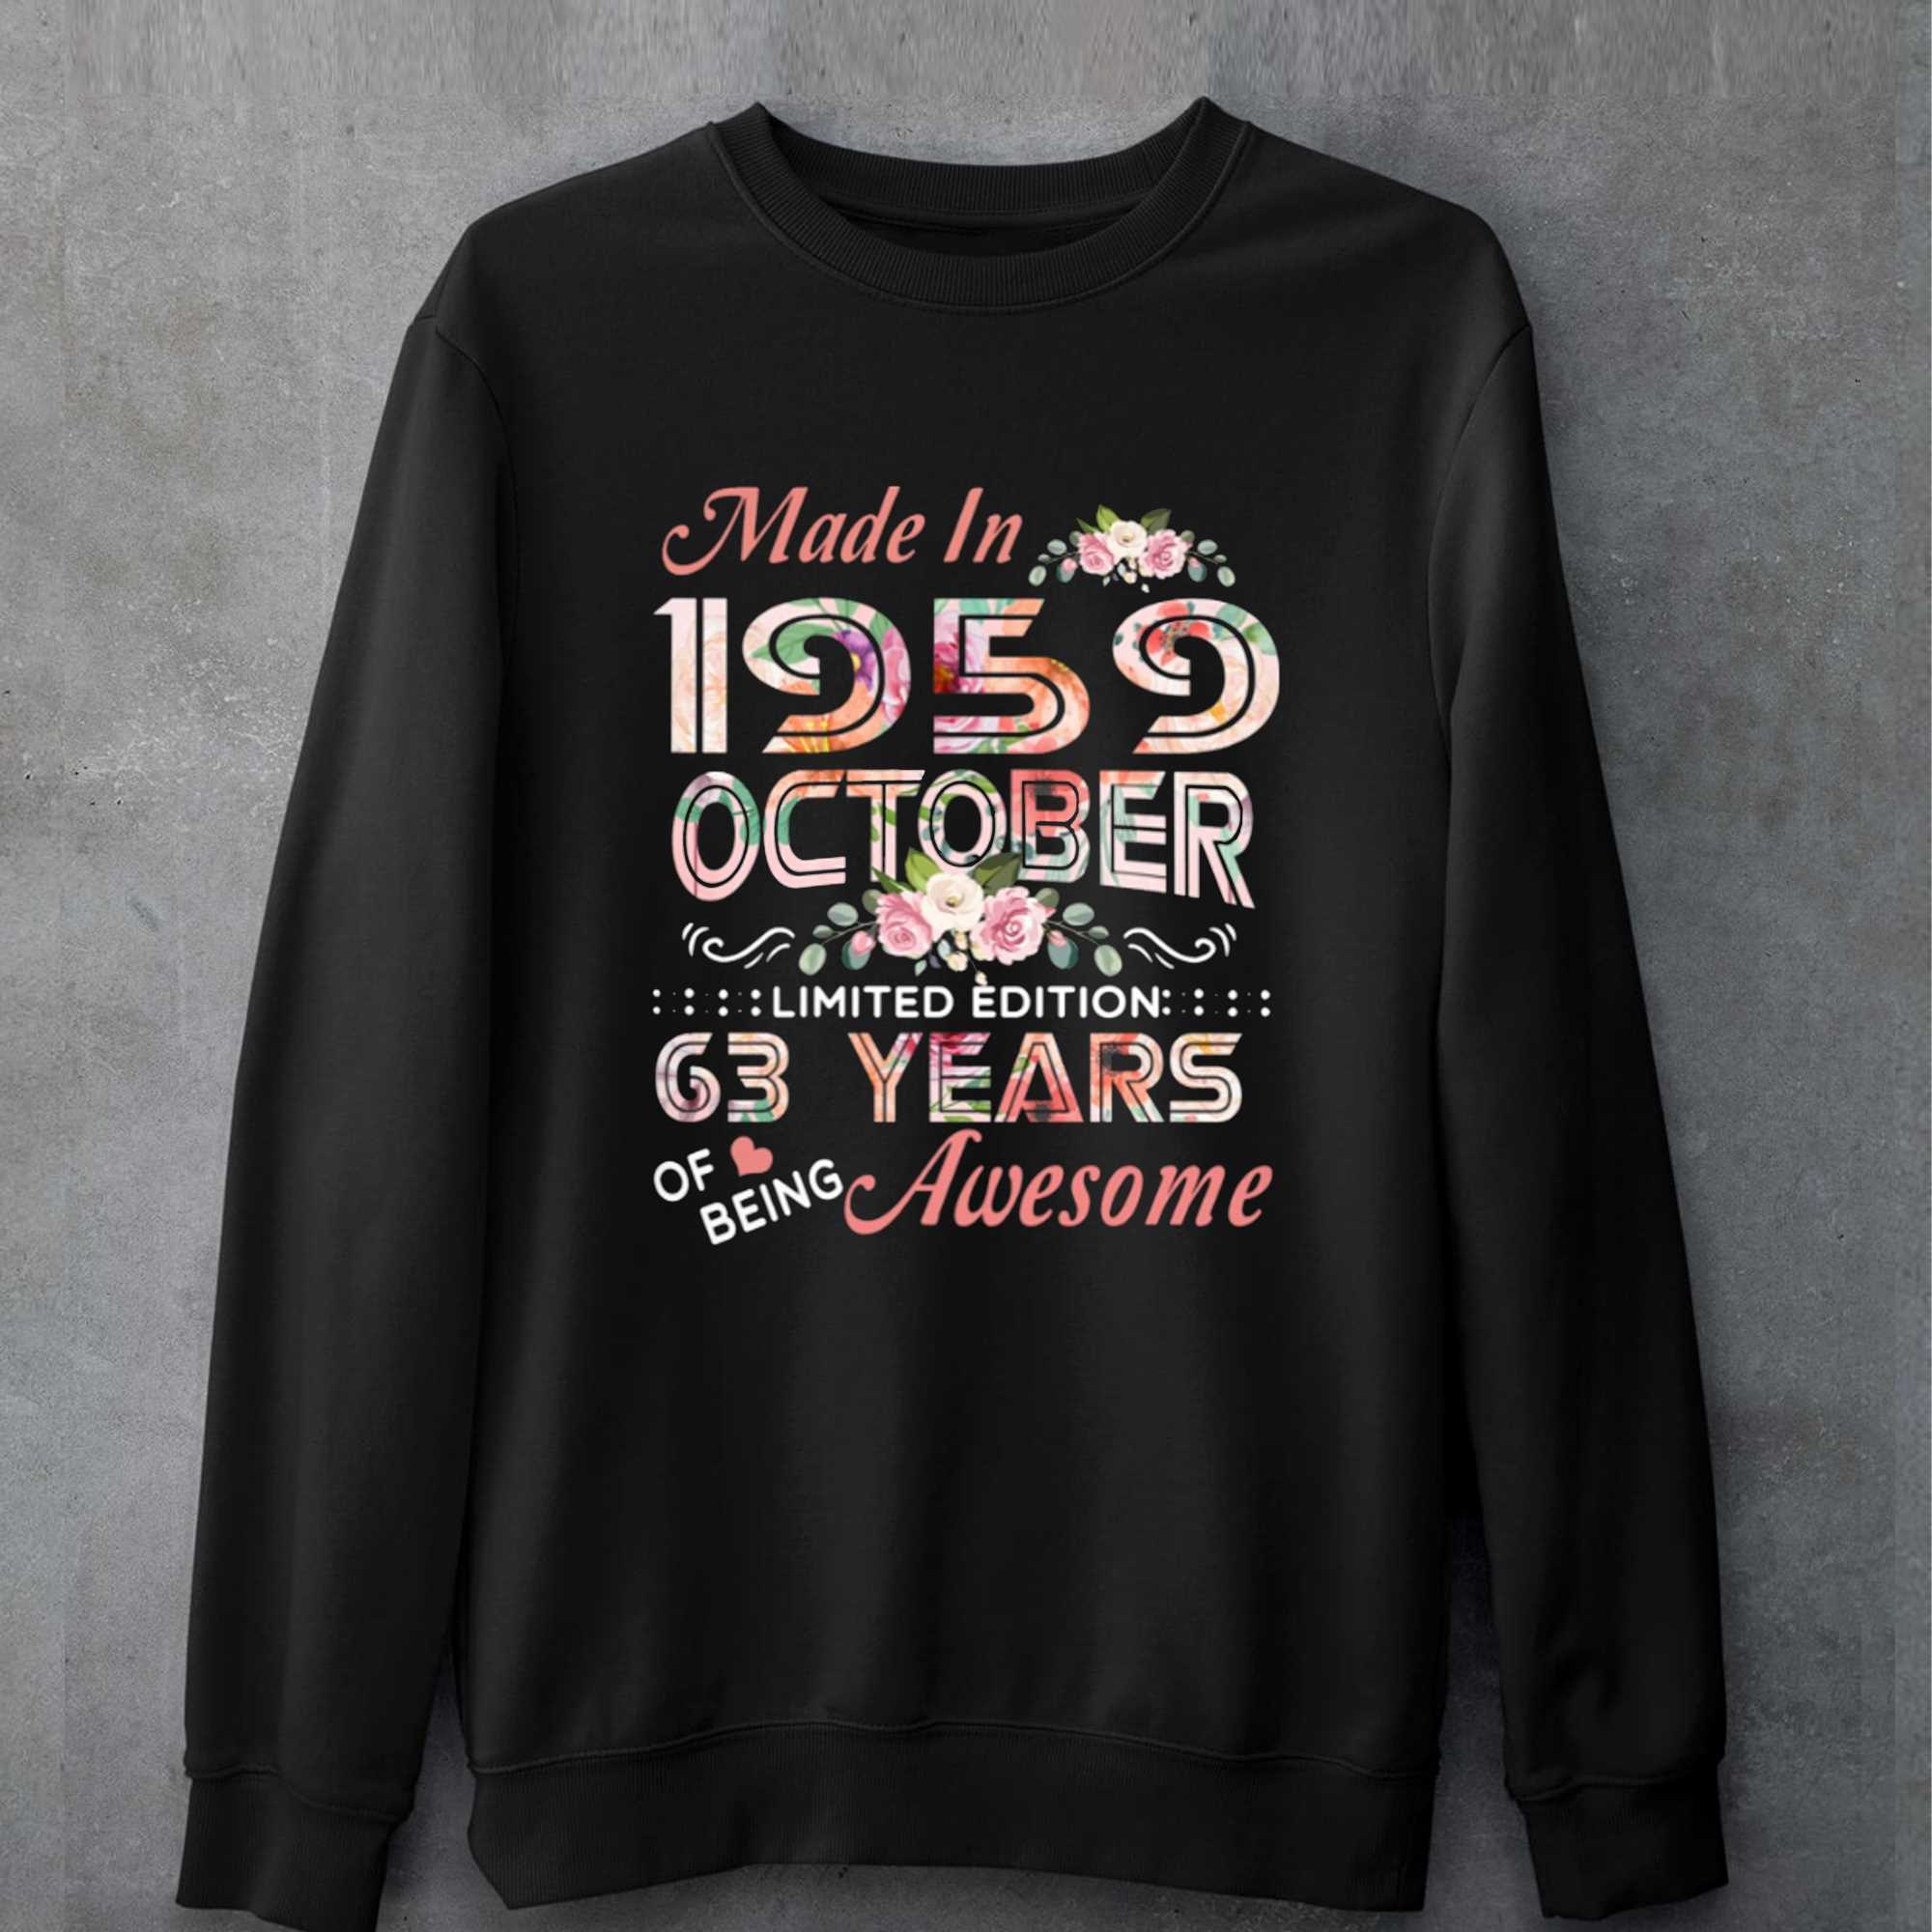 Made In 1959 October 63 Years T-shirt 